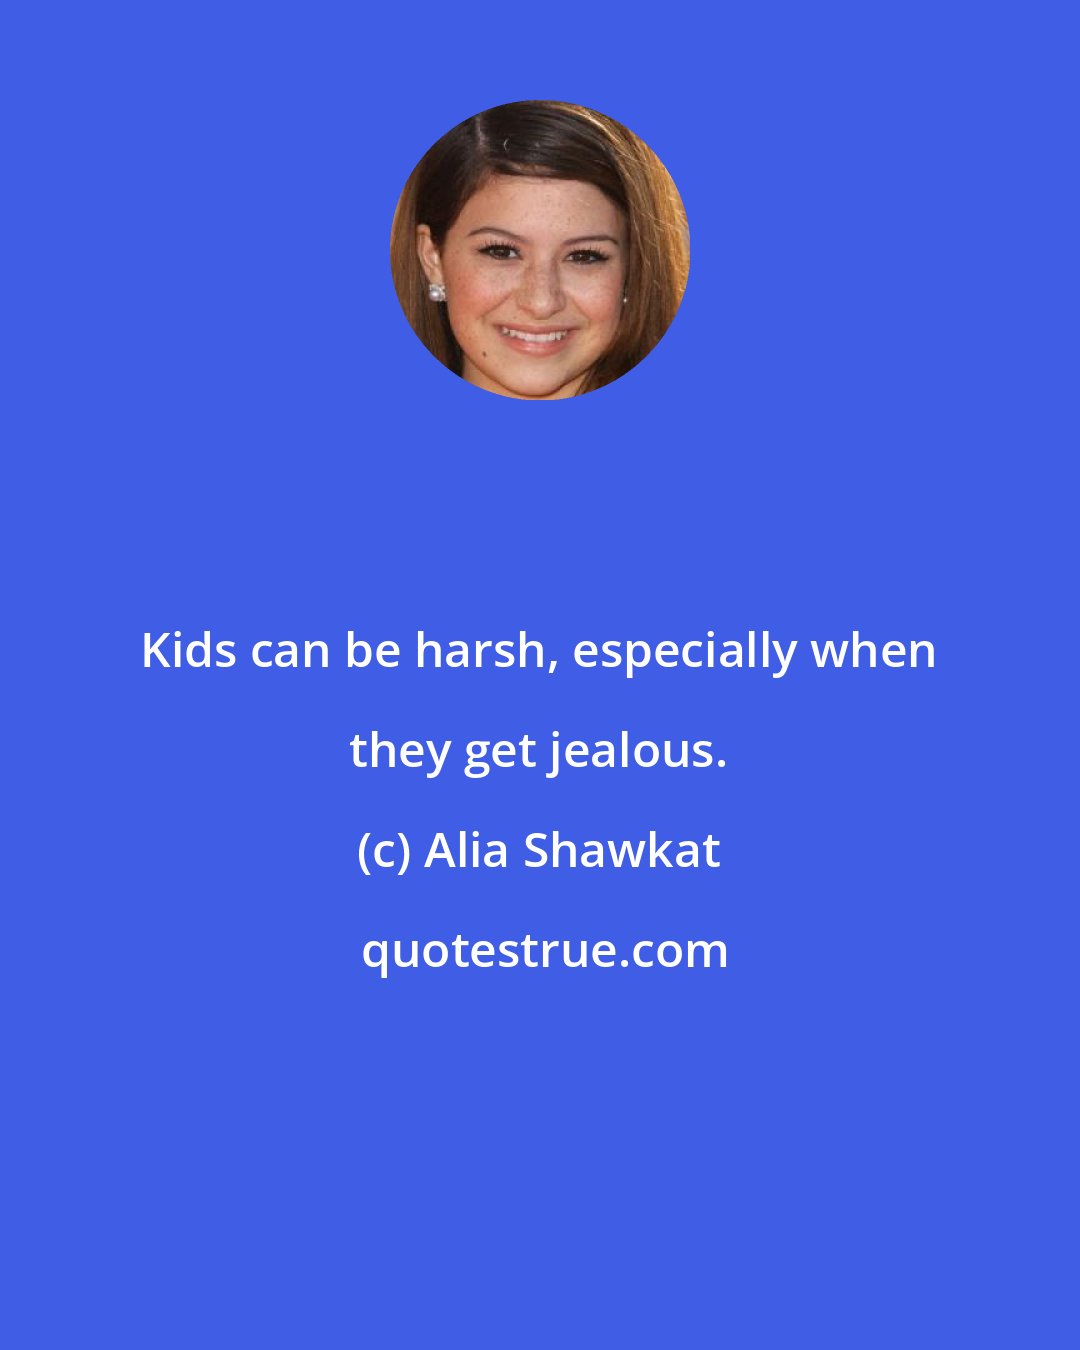 Alia Shawkat: Kids can be harsh, especially when they get jealous.